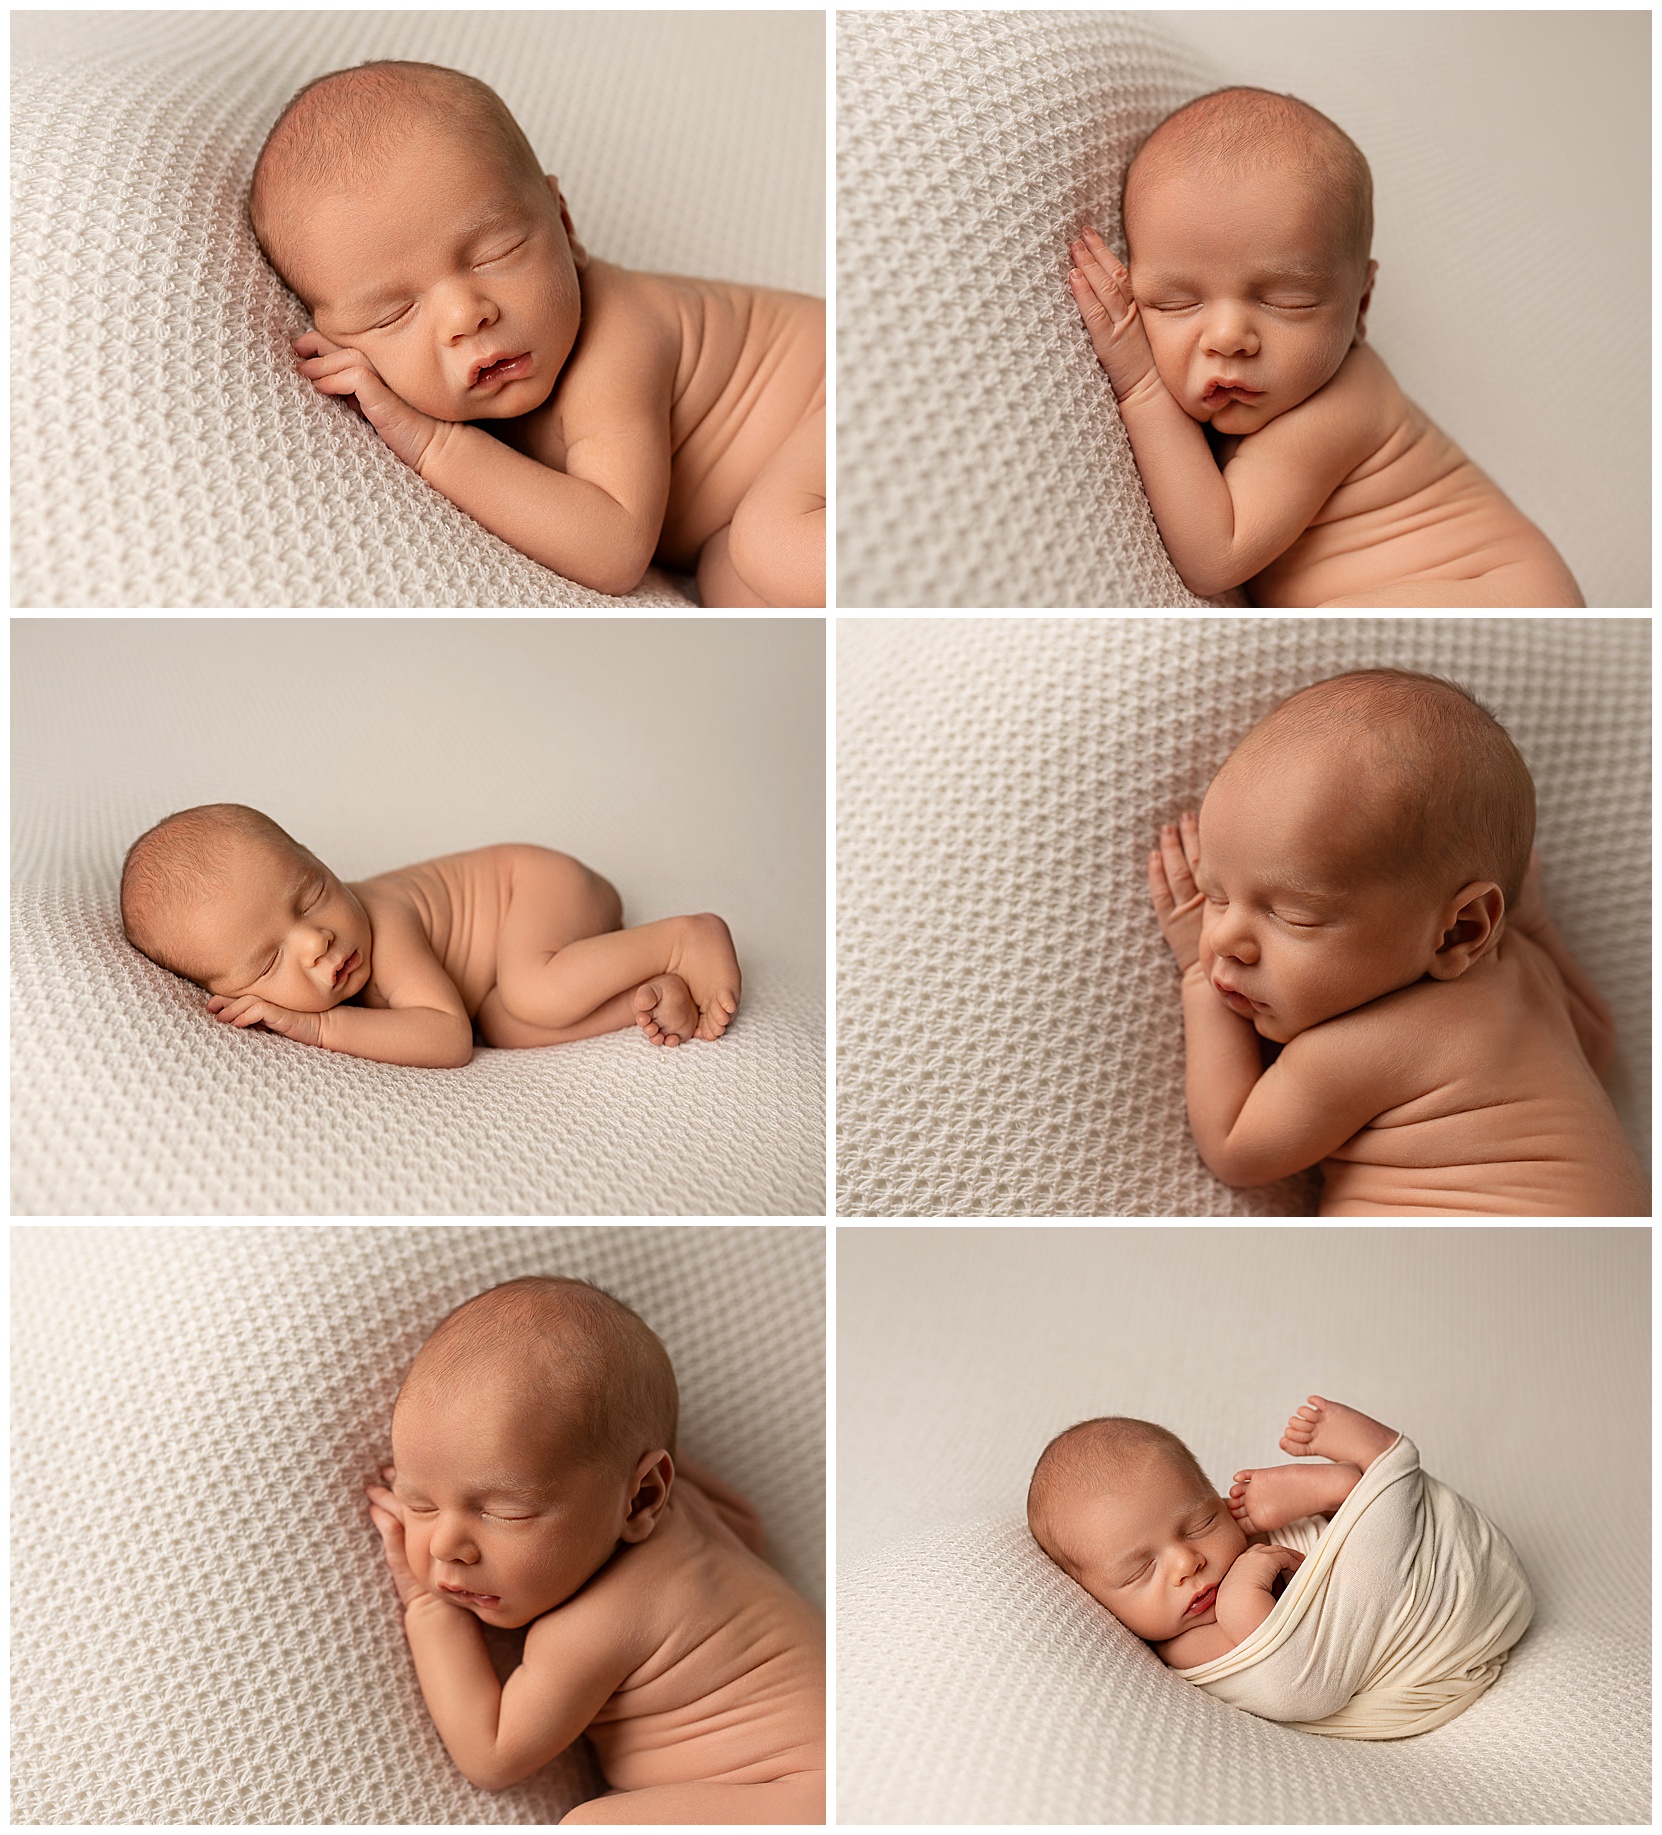 Newborns photo montage featuring the same naked newborn on a white, waffle-cut blanket. The bottom right photo is the only photo of the newborn swaddled in white.